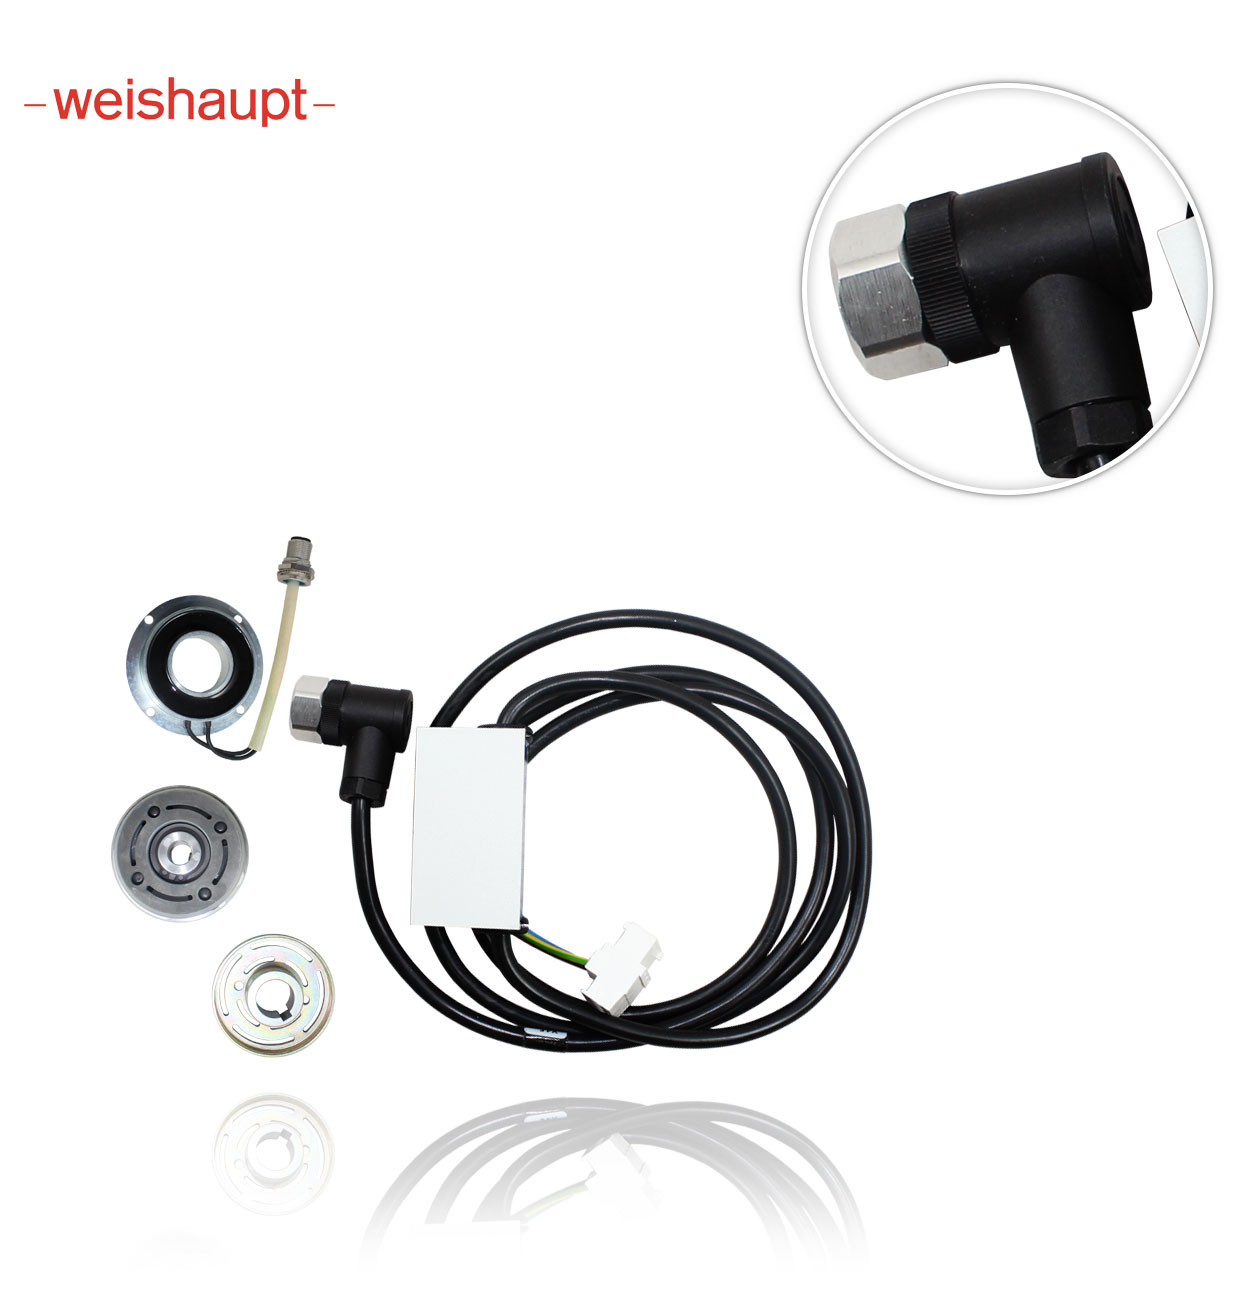 WMK1  WEISHAUPT MAGNETIC COUPLING